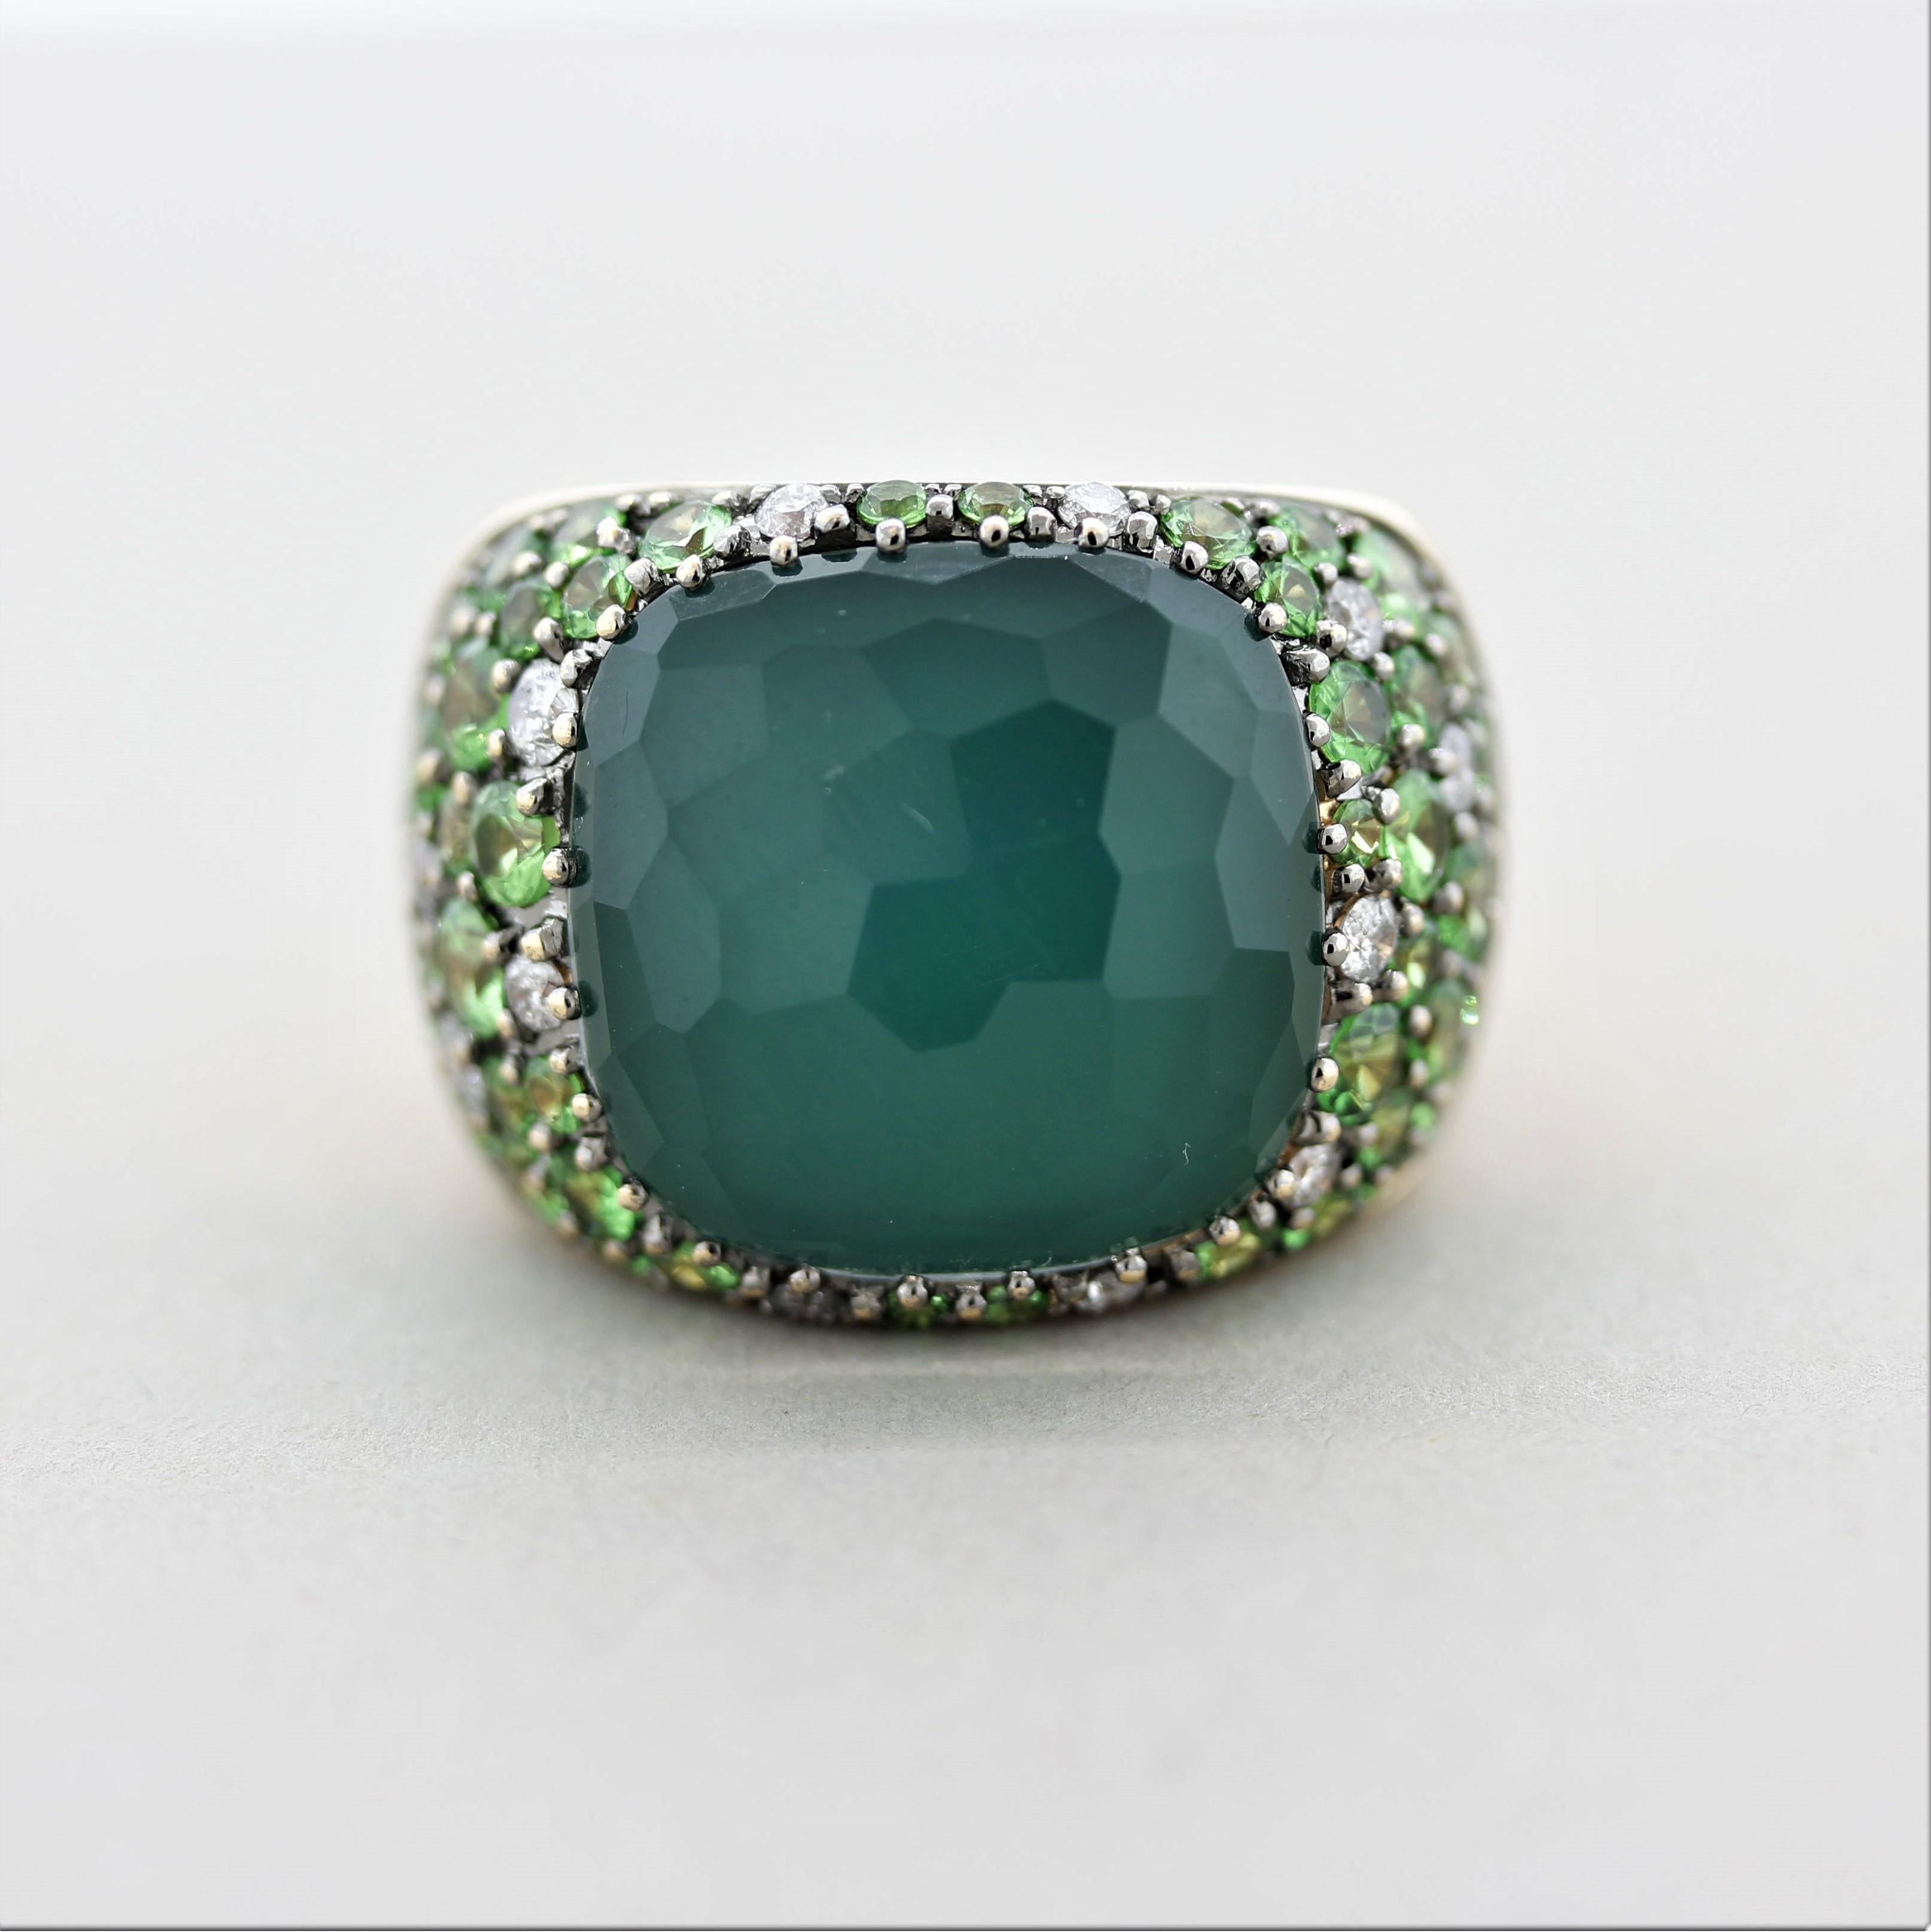 A large and impressive cocktail ring. The center stone is a 16.26 carat crystal quartz. It is set atop green enameled gold which gives the colorless crystal a green color. It is accented by bright vibrant green tsavorite that are round shaped and